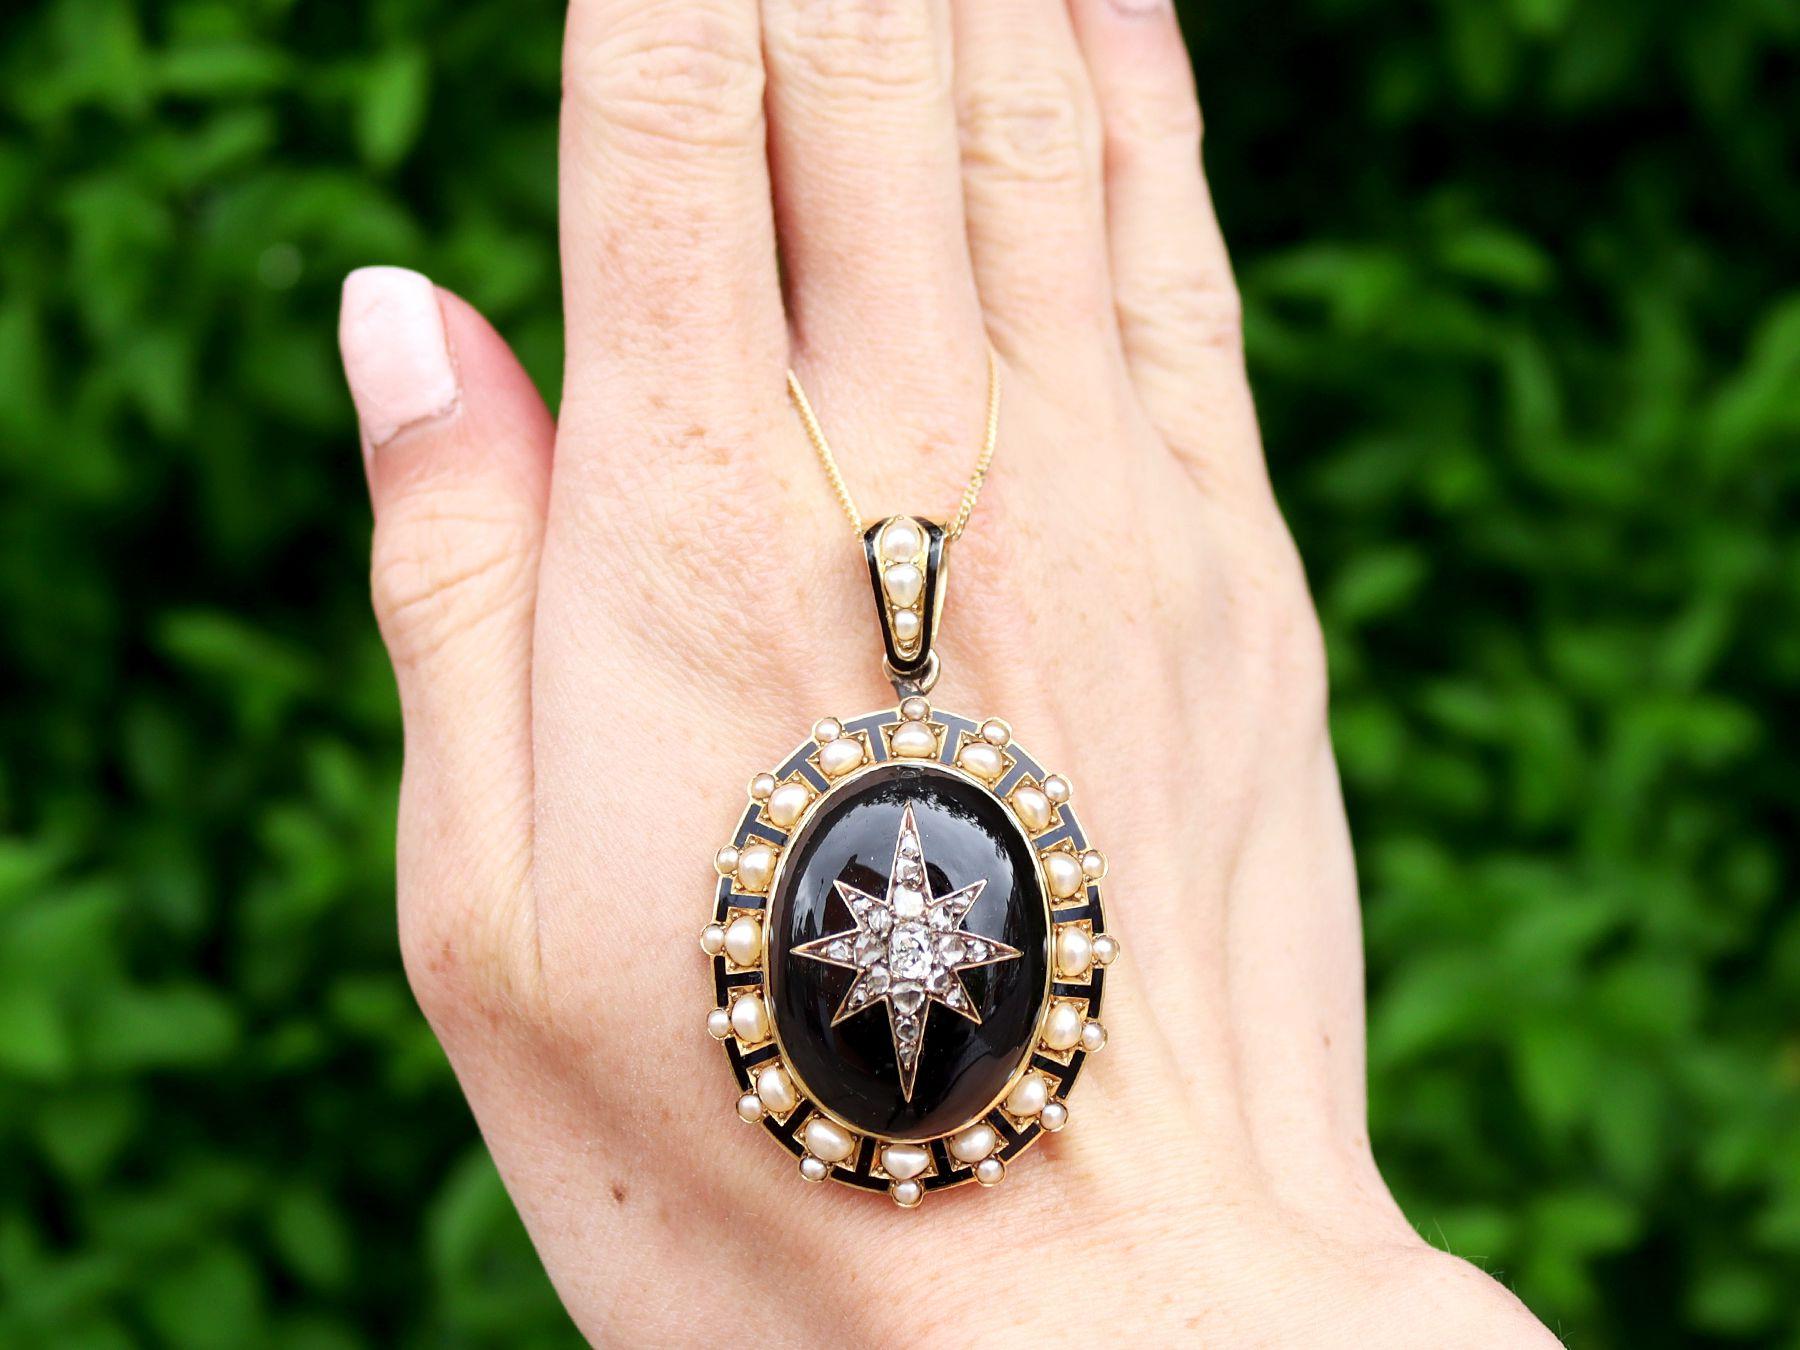 A stunning, fine and impressive antique onyx, pearl, 0.98 carat diamond and enamel, 18 karat yellow gold pendant; part of our diverse Victorian gemstone jewelry and estate jewelry collections

This stunning antique pendant has been crafted in 18k